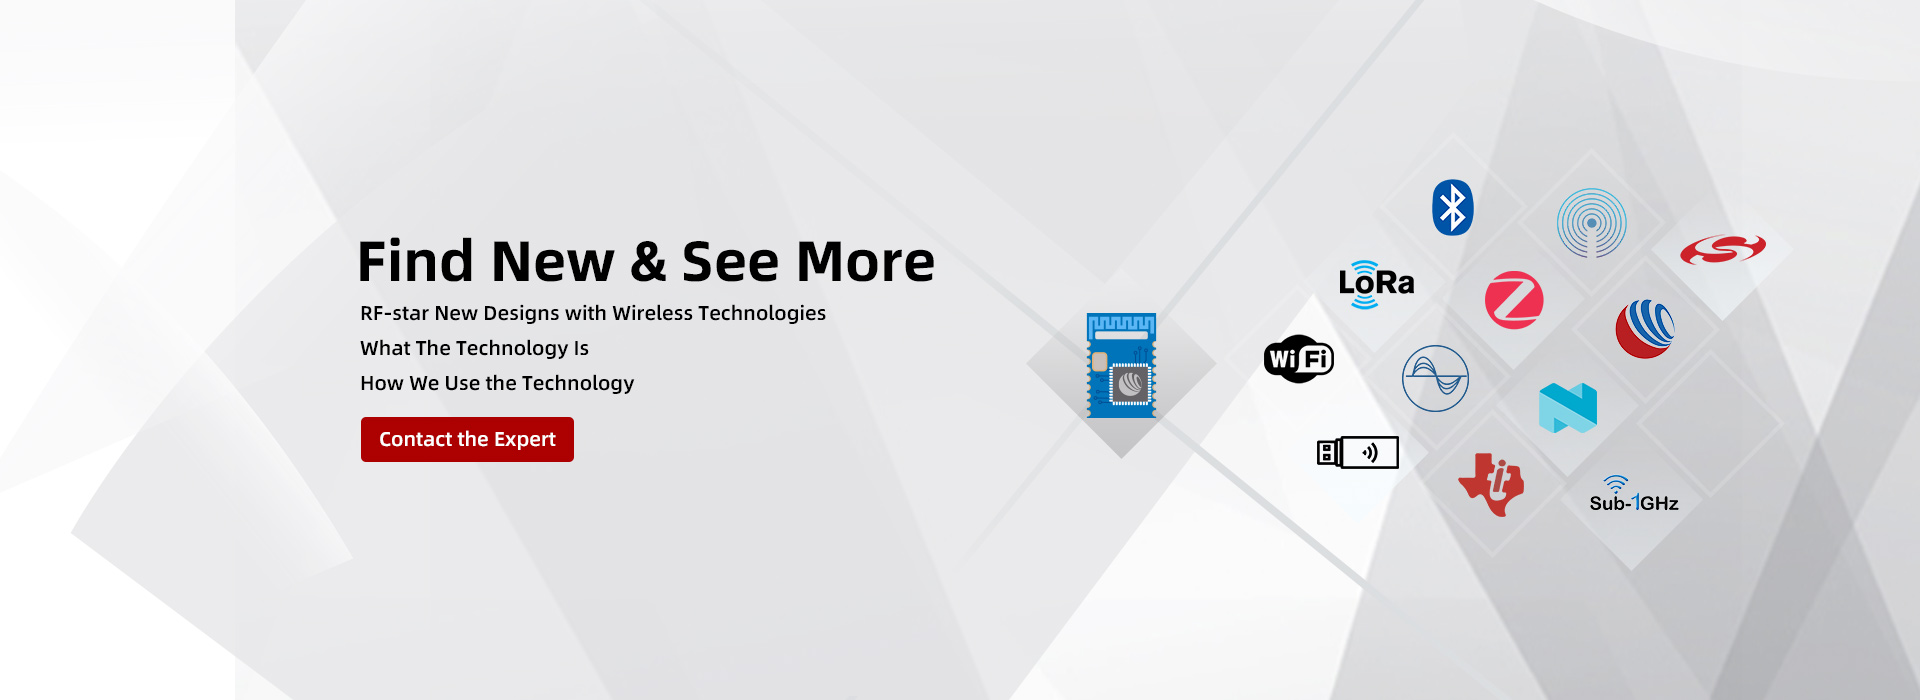 Find New Designs with Wireless Technologies